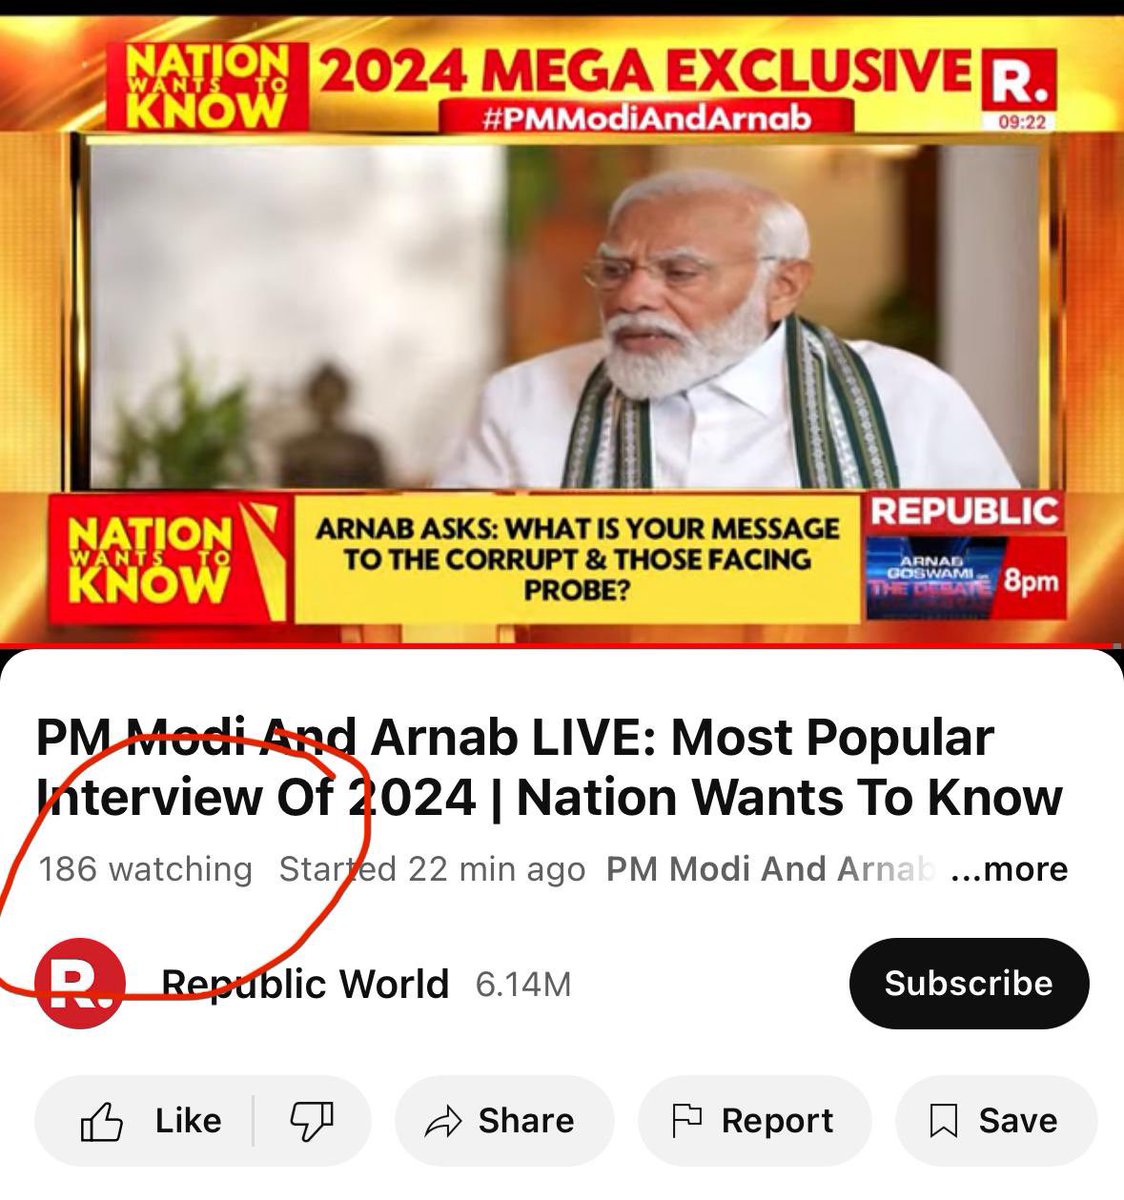 Nation’s most popular interview, live on Republic TV, watched by 186 people. People have realised the game so fast! Glad that we could make an impact!